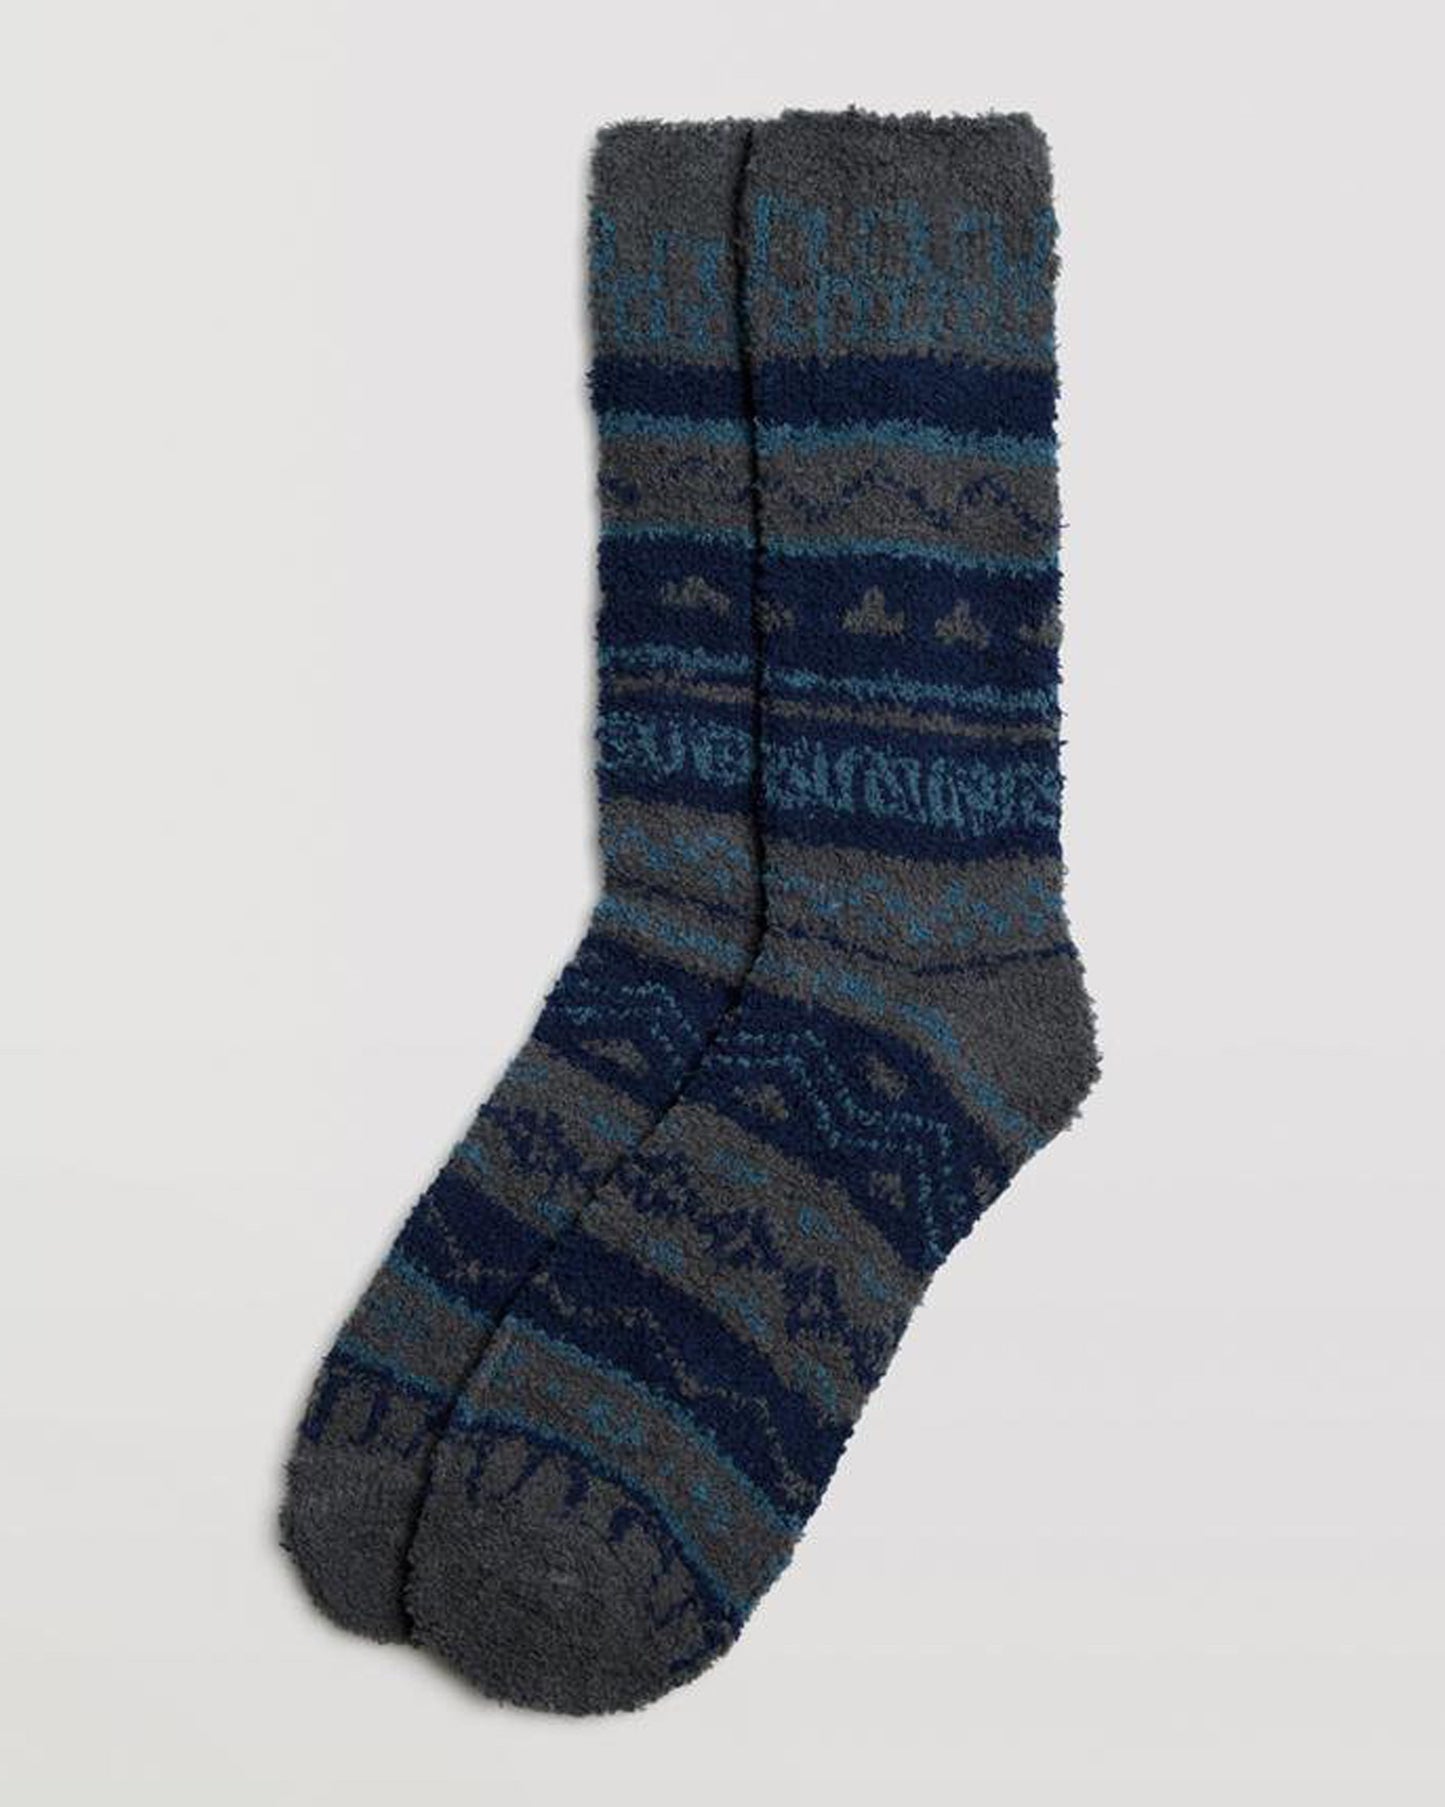 Ysabel Mora 22892 Aztec Flannel Socks - Soft and fluffy dark grey Aztec style patterned house thermal socks in shades of blue.